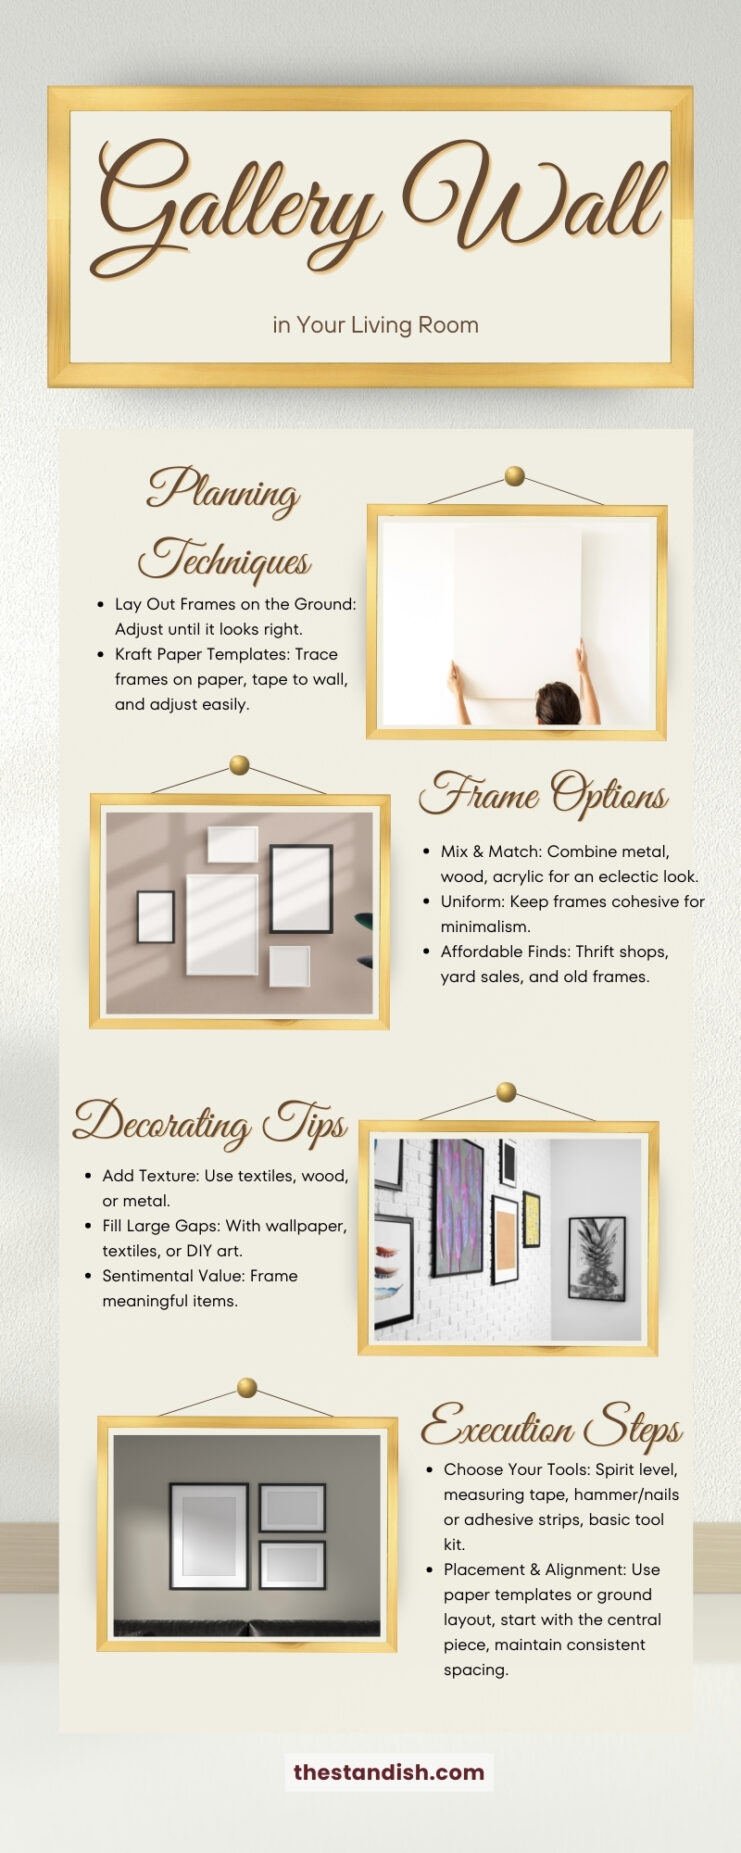 How to Build a Gallery Wall in Your Living Room Infographic